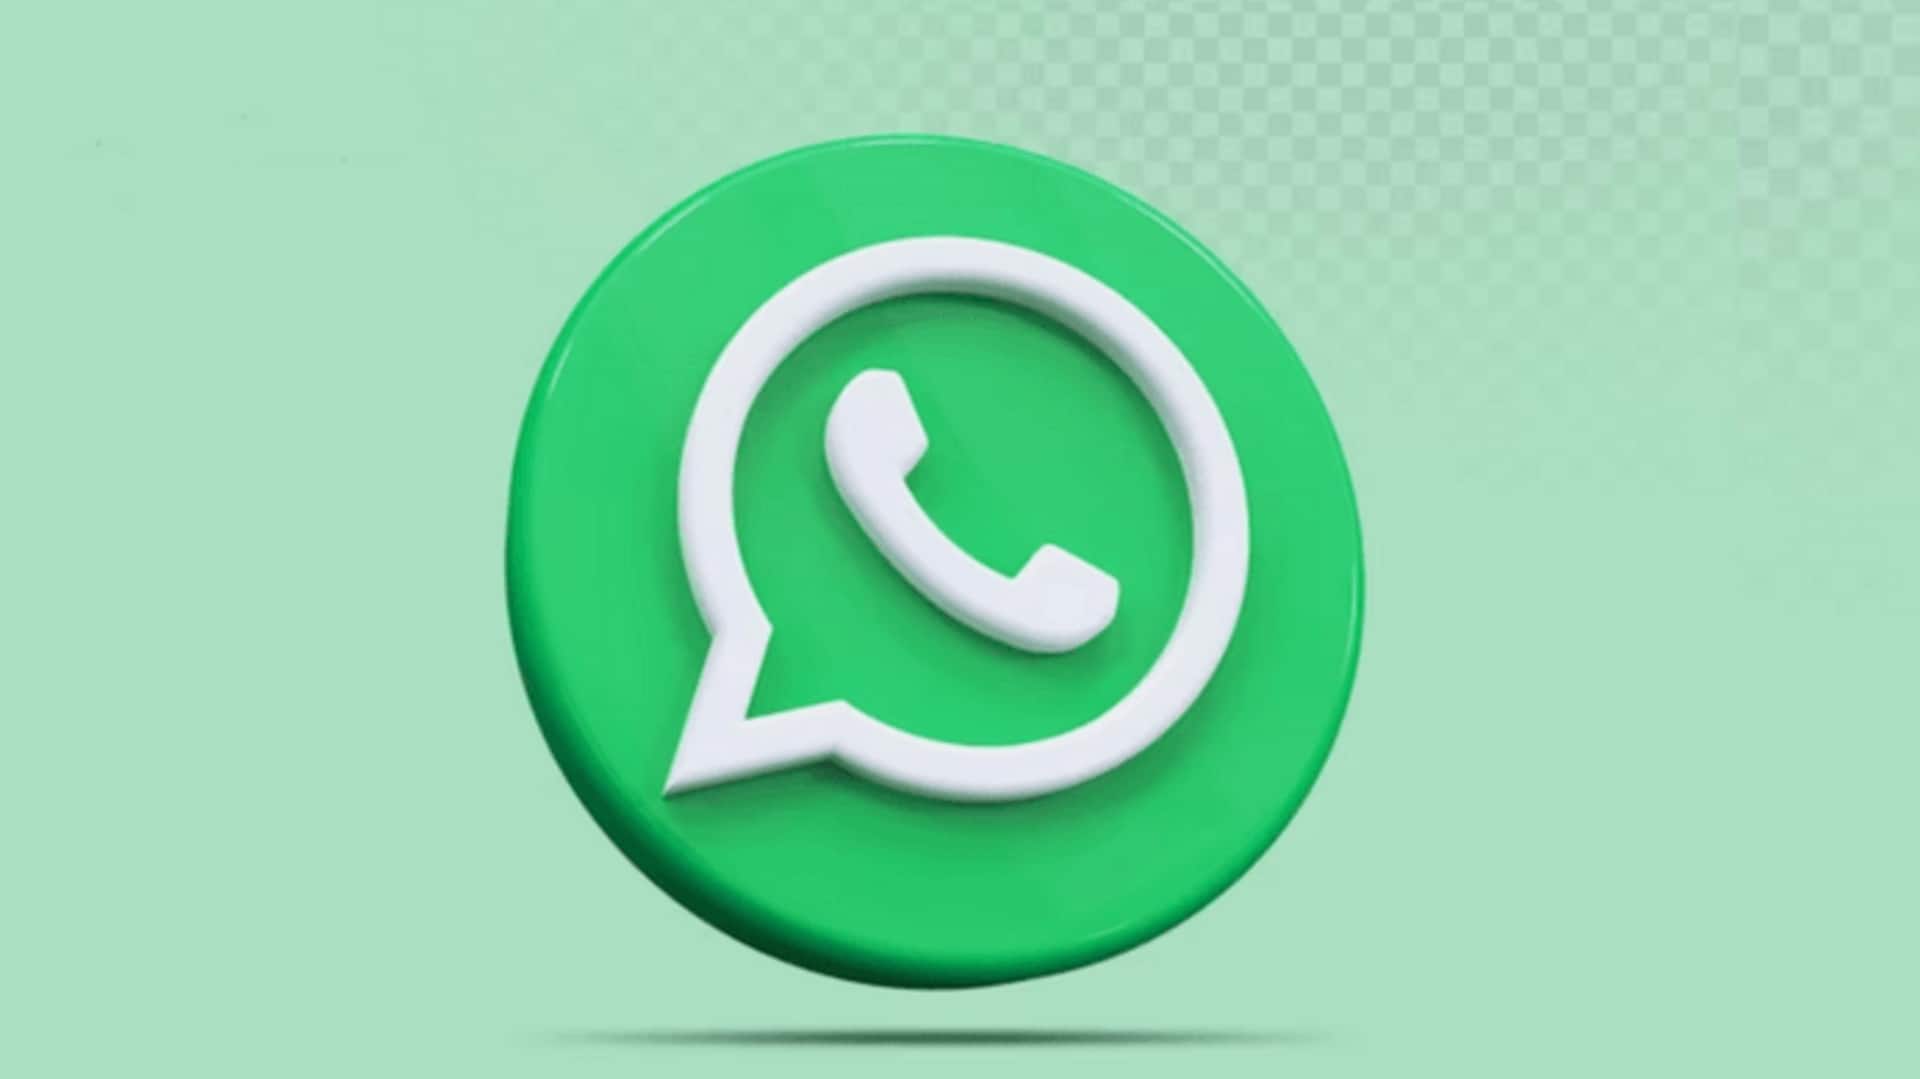 You can now send HD photos on WhatsApp: Here's how